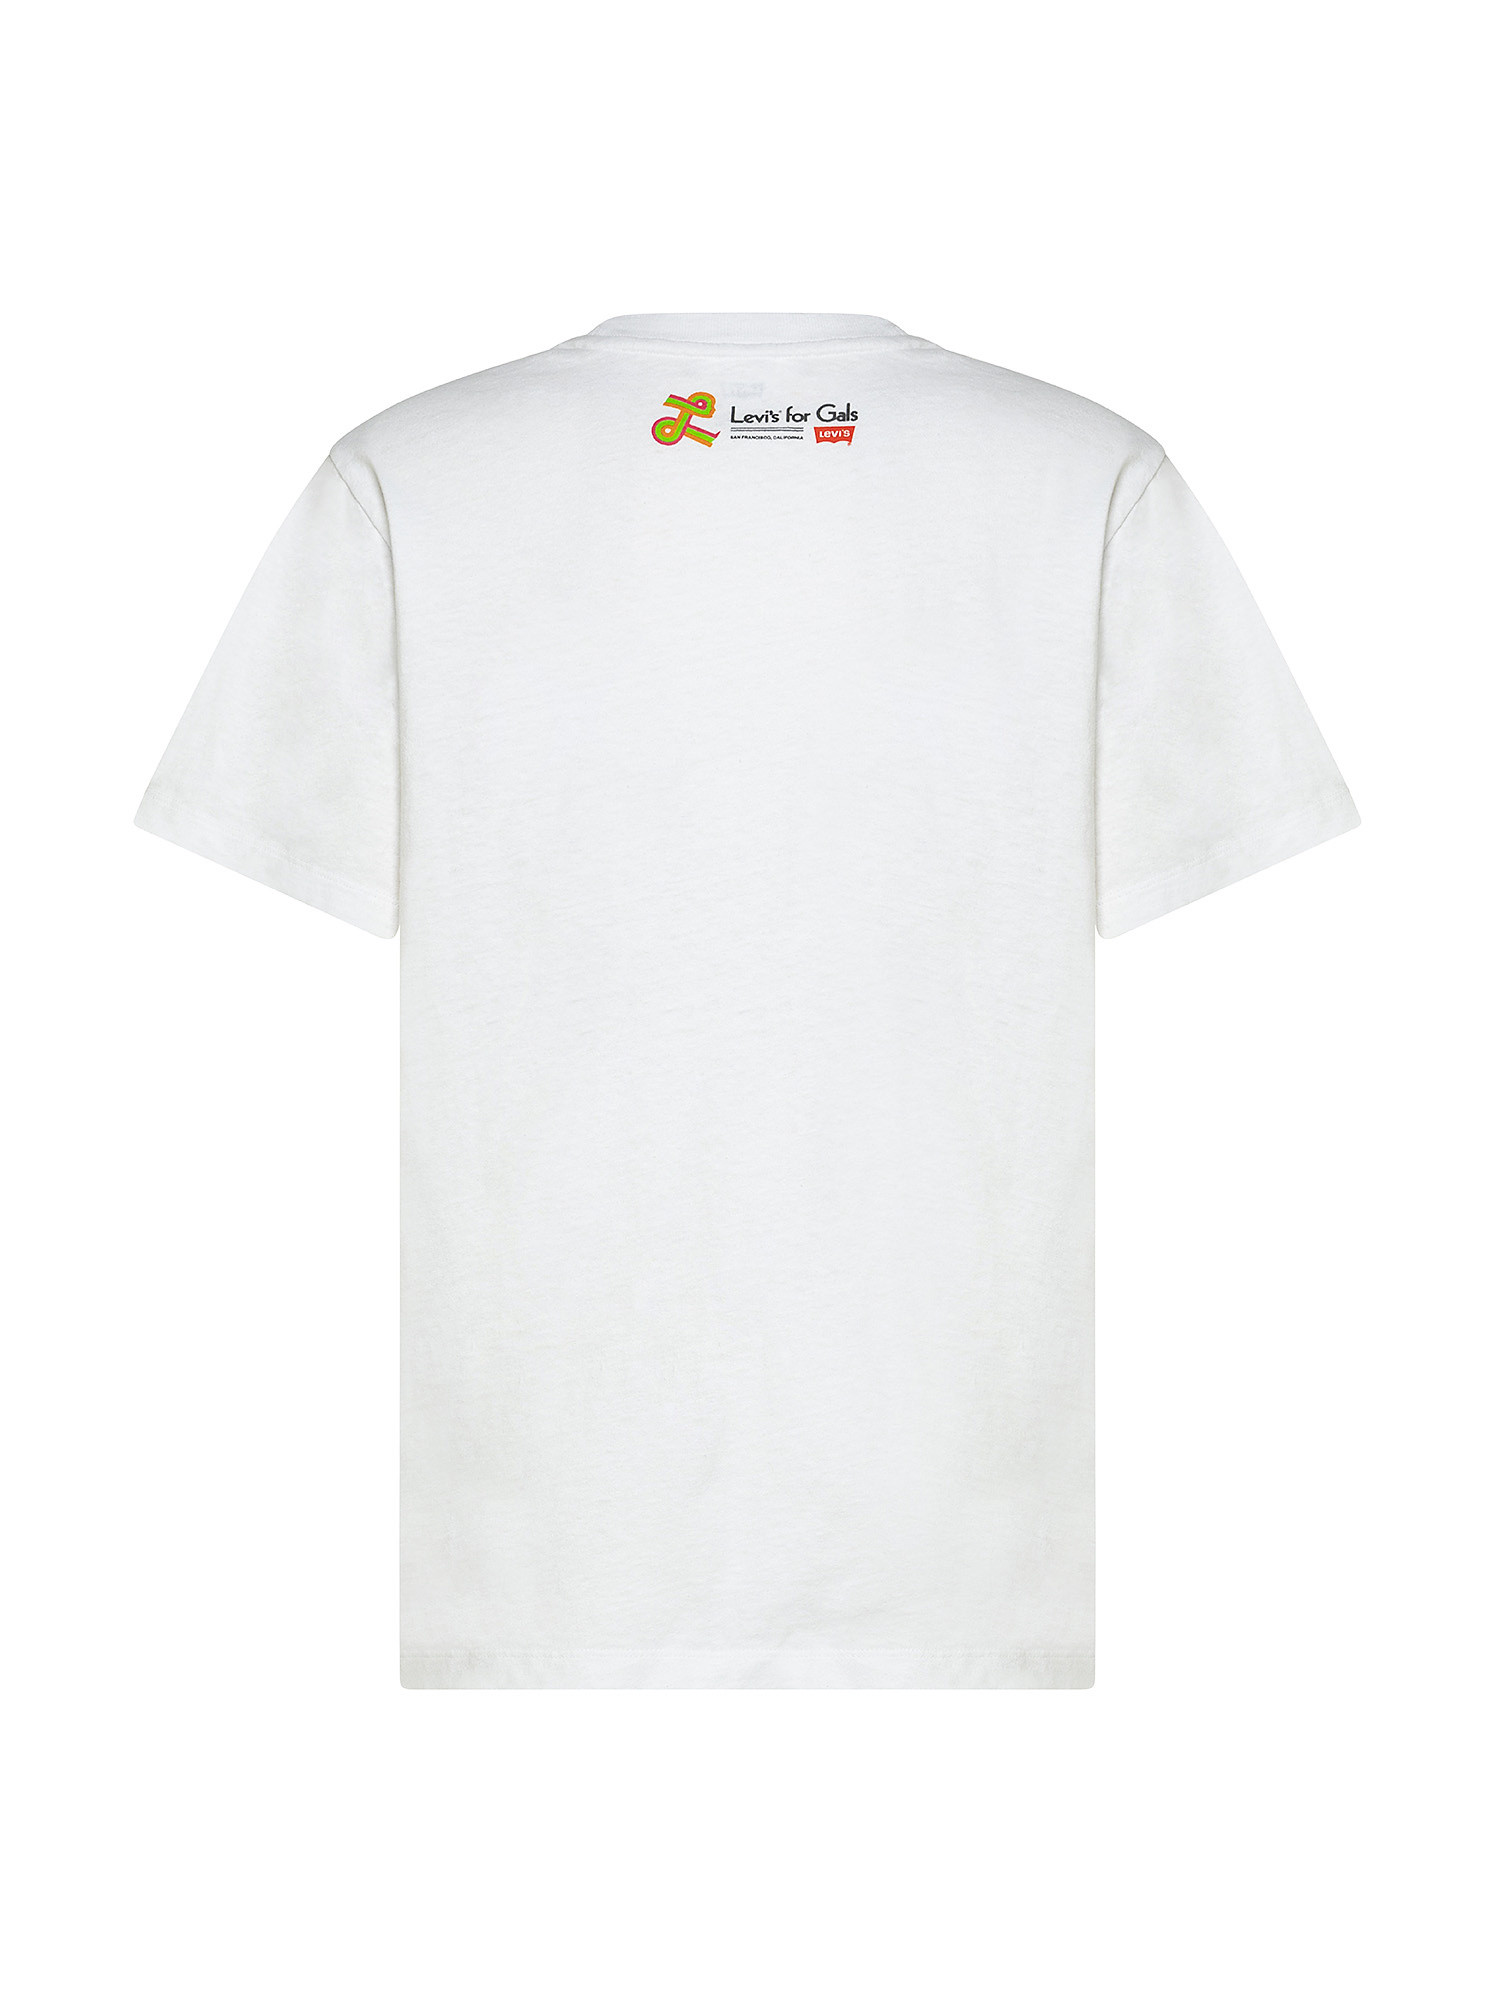 Graphic Jet Tee T-shirt, White, large image number 1